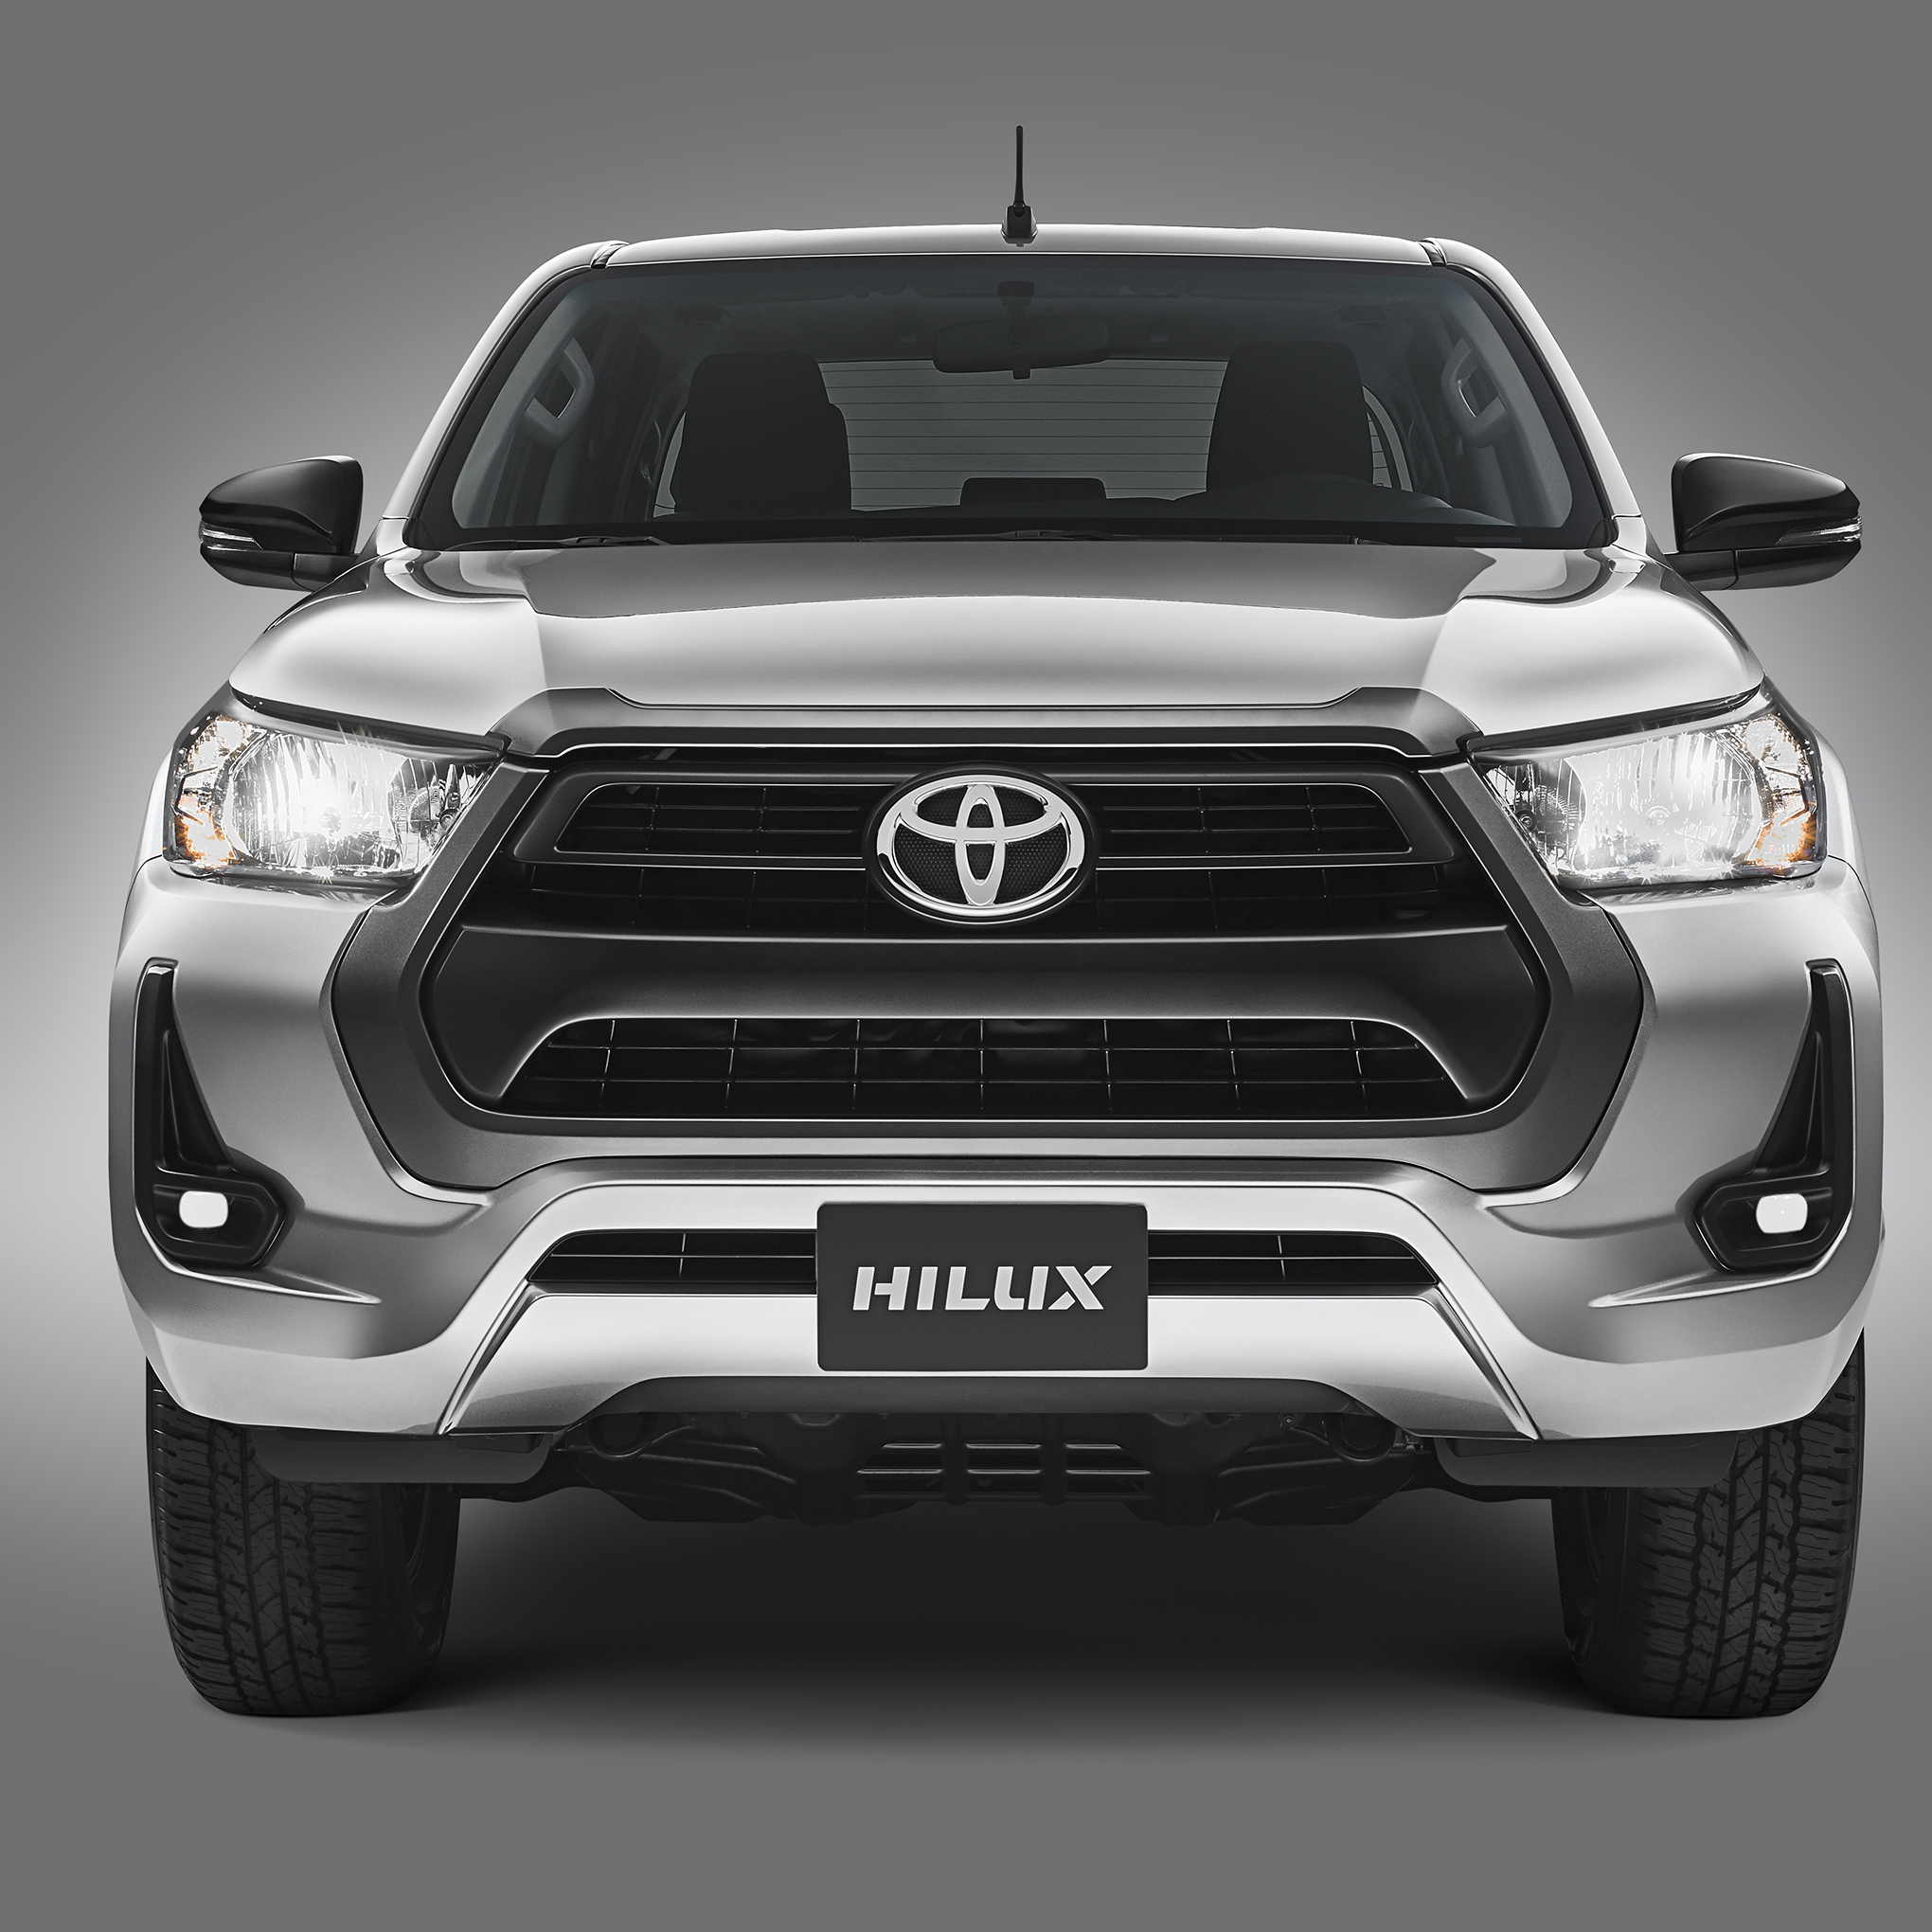 Footer Hilux